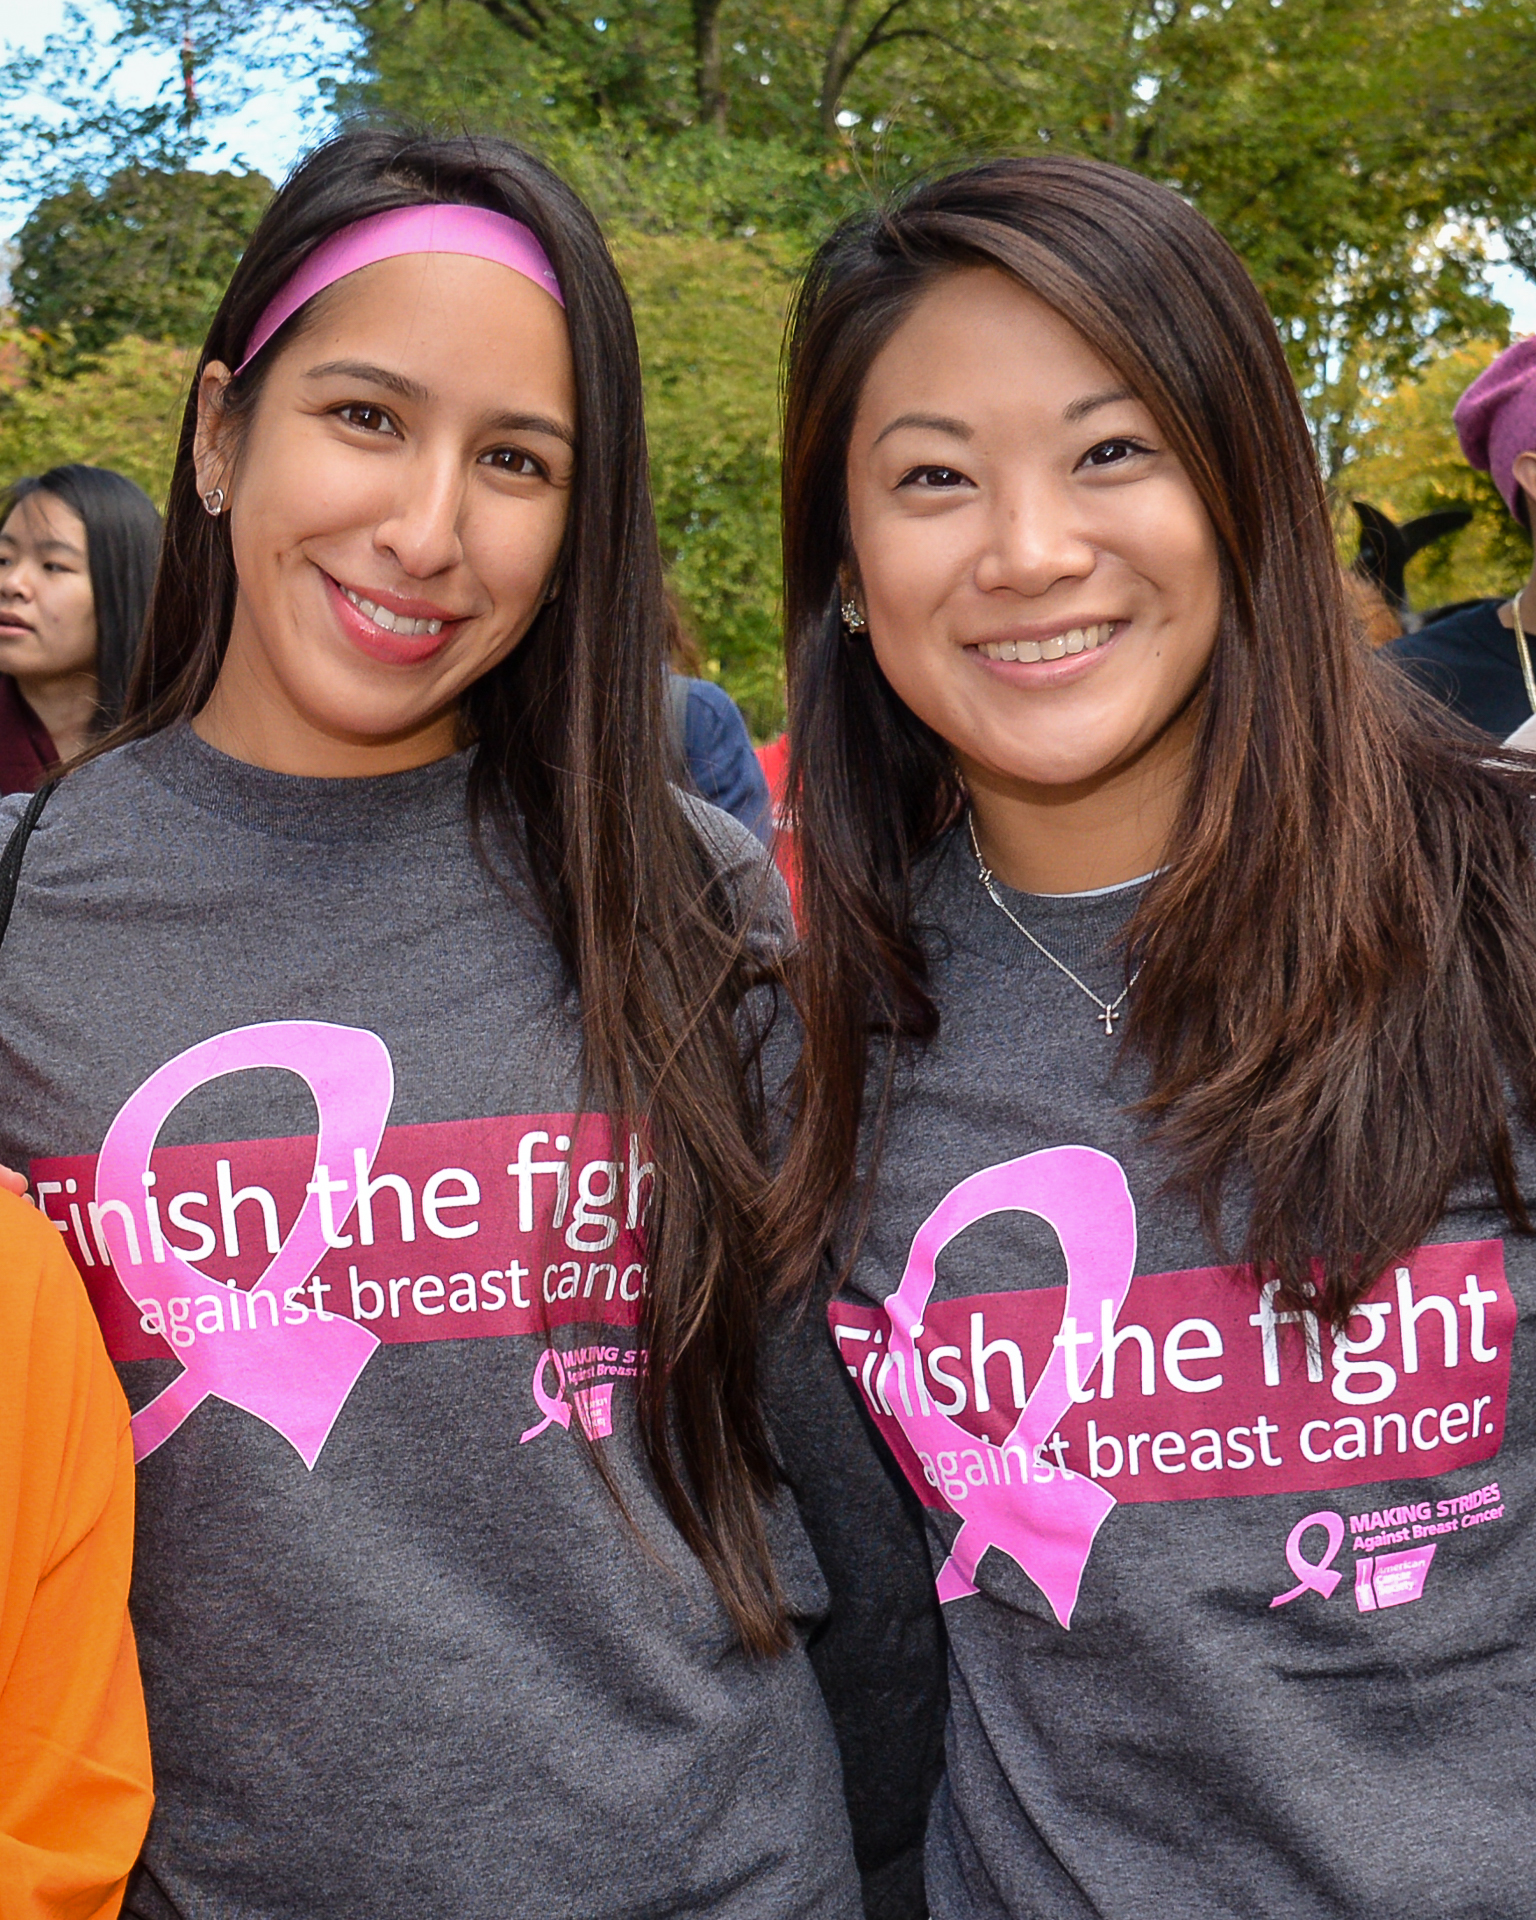 Making Strides Against Breast Cancer--Central Park, American Cancer Society, NYC.